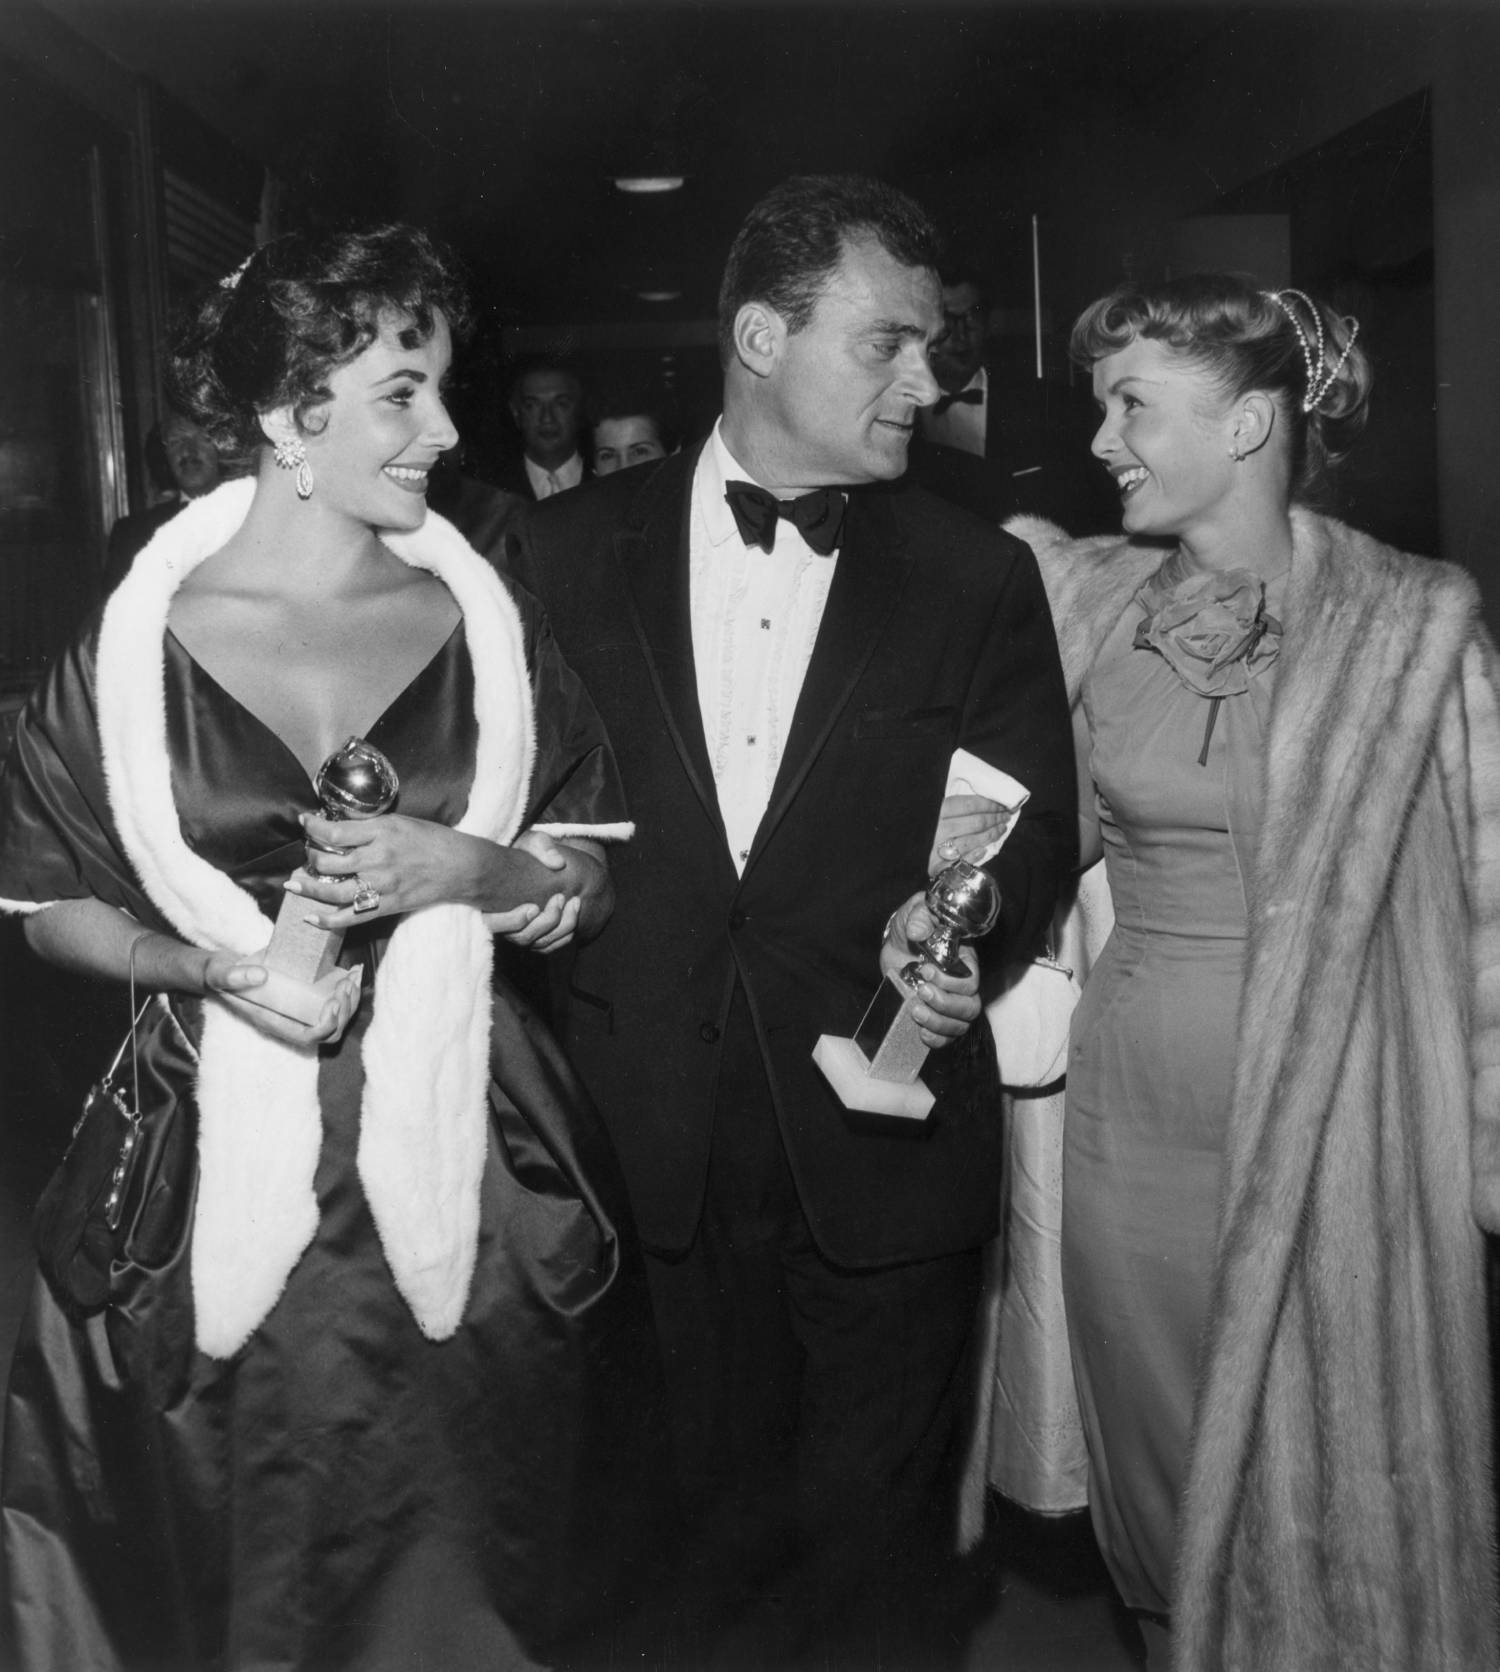 From left to right, British-born actor Elizabeth Taylor and her husband, film producer Mike Todd (1909 - 1958), hold their Golden Globe awards while walking with American actor Debbie Reynolds at the Hollywood Foreign Press Association Awards Dinner in Los Angeles. Taylor won a special award for consistent performance, and Todd produced Michael Anderson's 1957 film, 'Around the World in Eighty Days,' which received the Best Motion Picture- Drama award. 